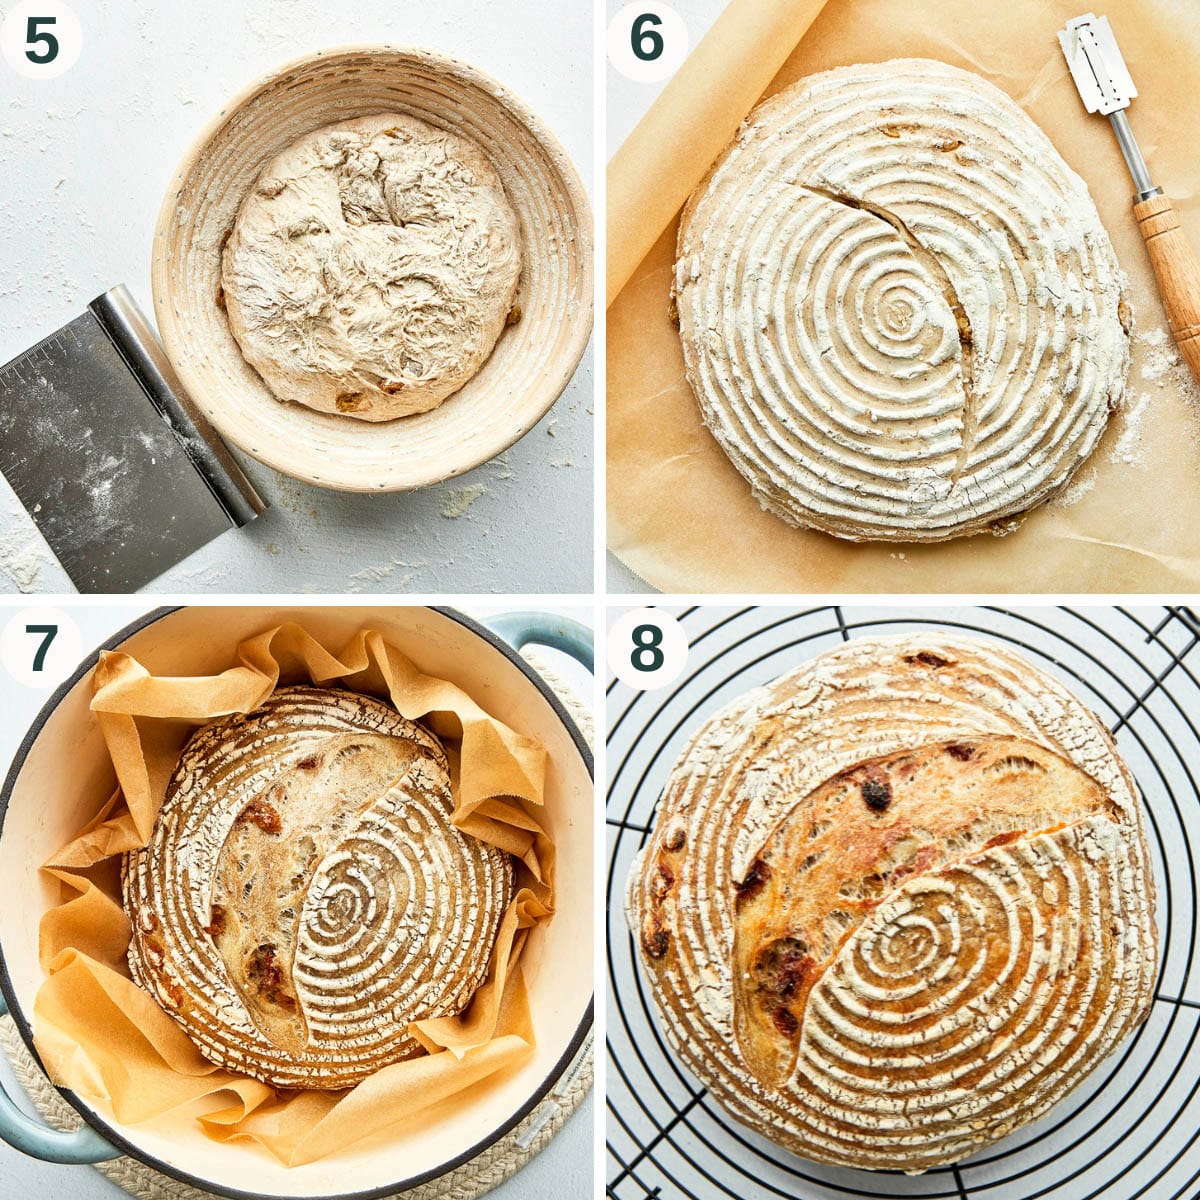 Sourdough bread steps 5 to 8, in the banneton, scored, before and after baking.